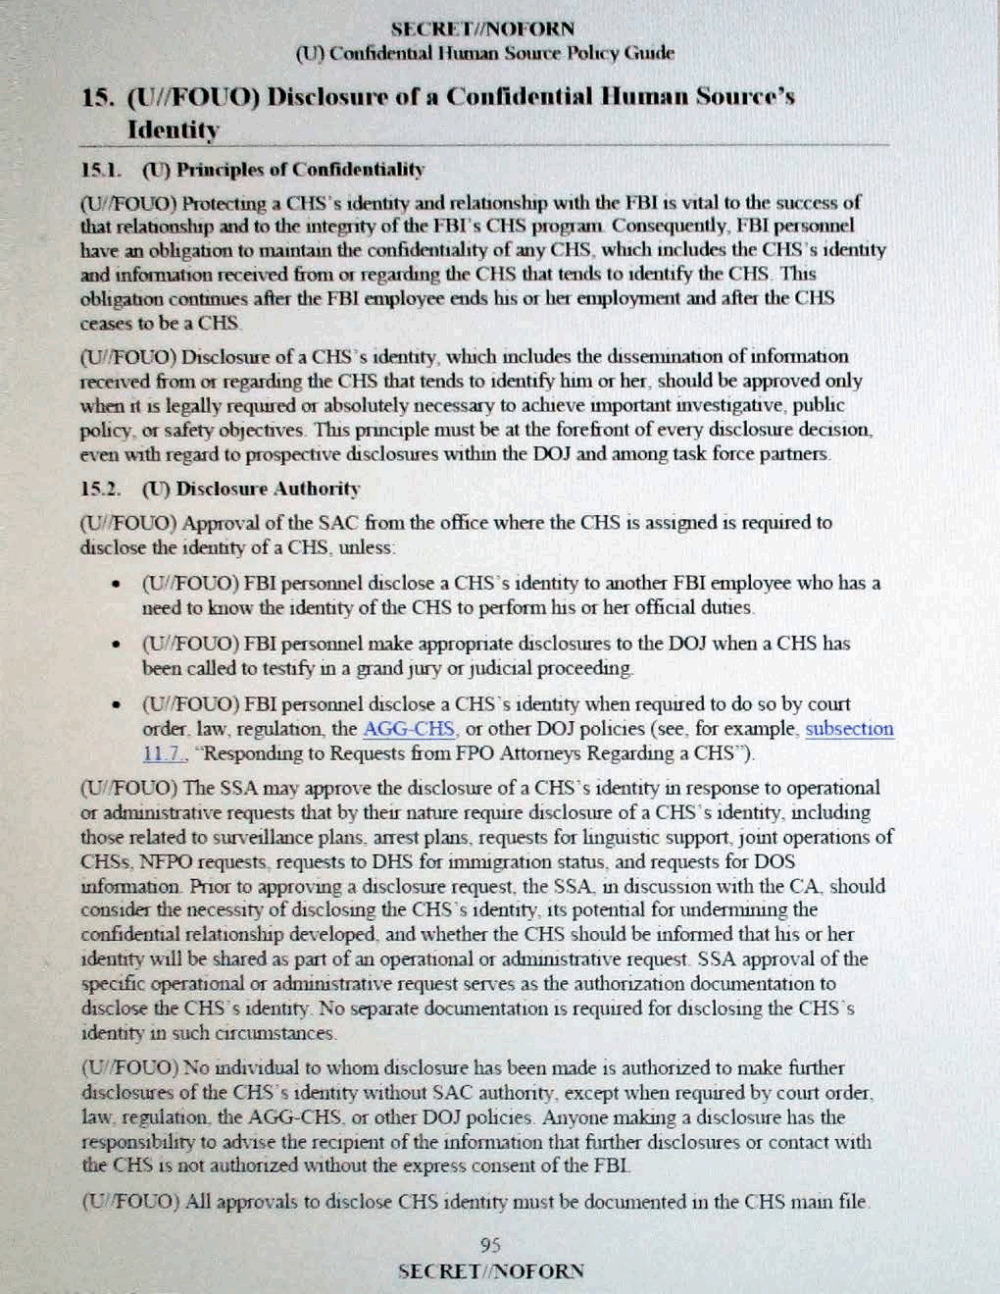 Page 105 from Confidential Human Source Policy Guide